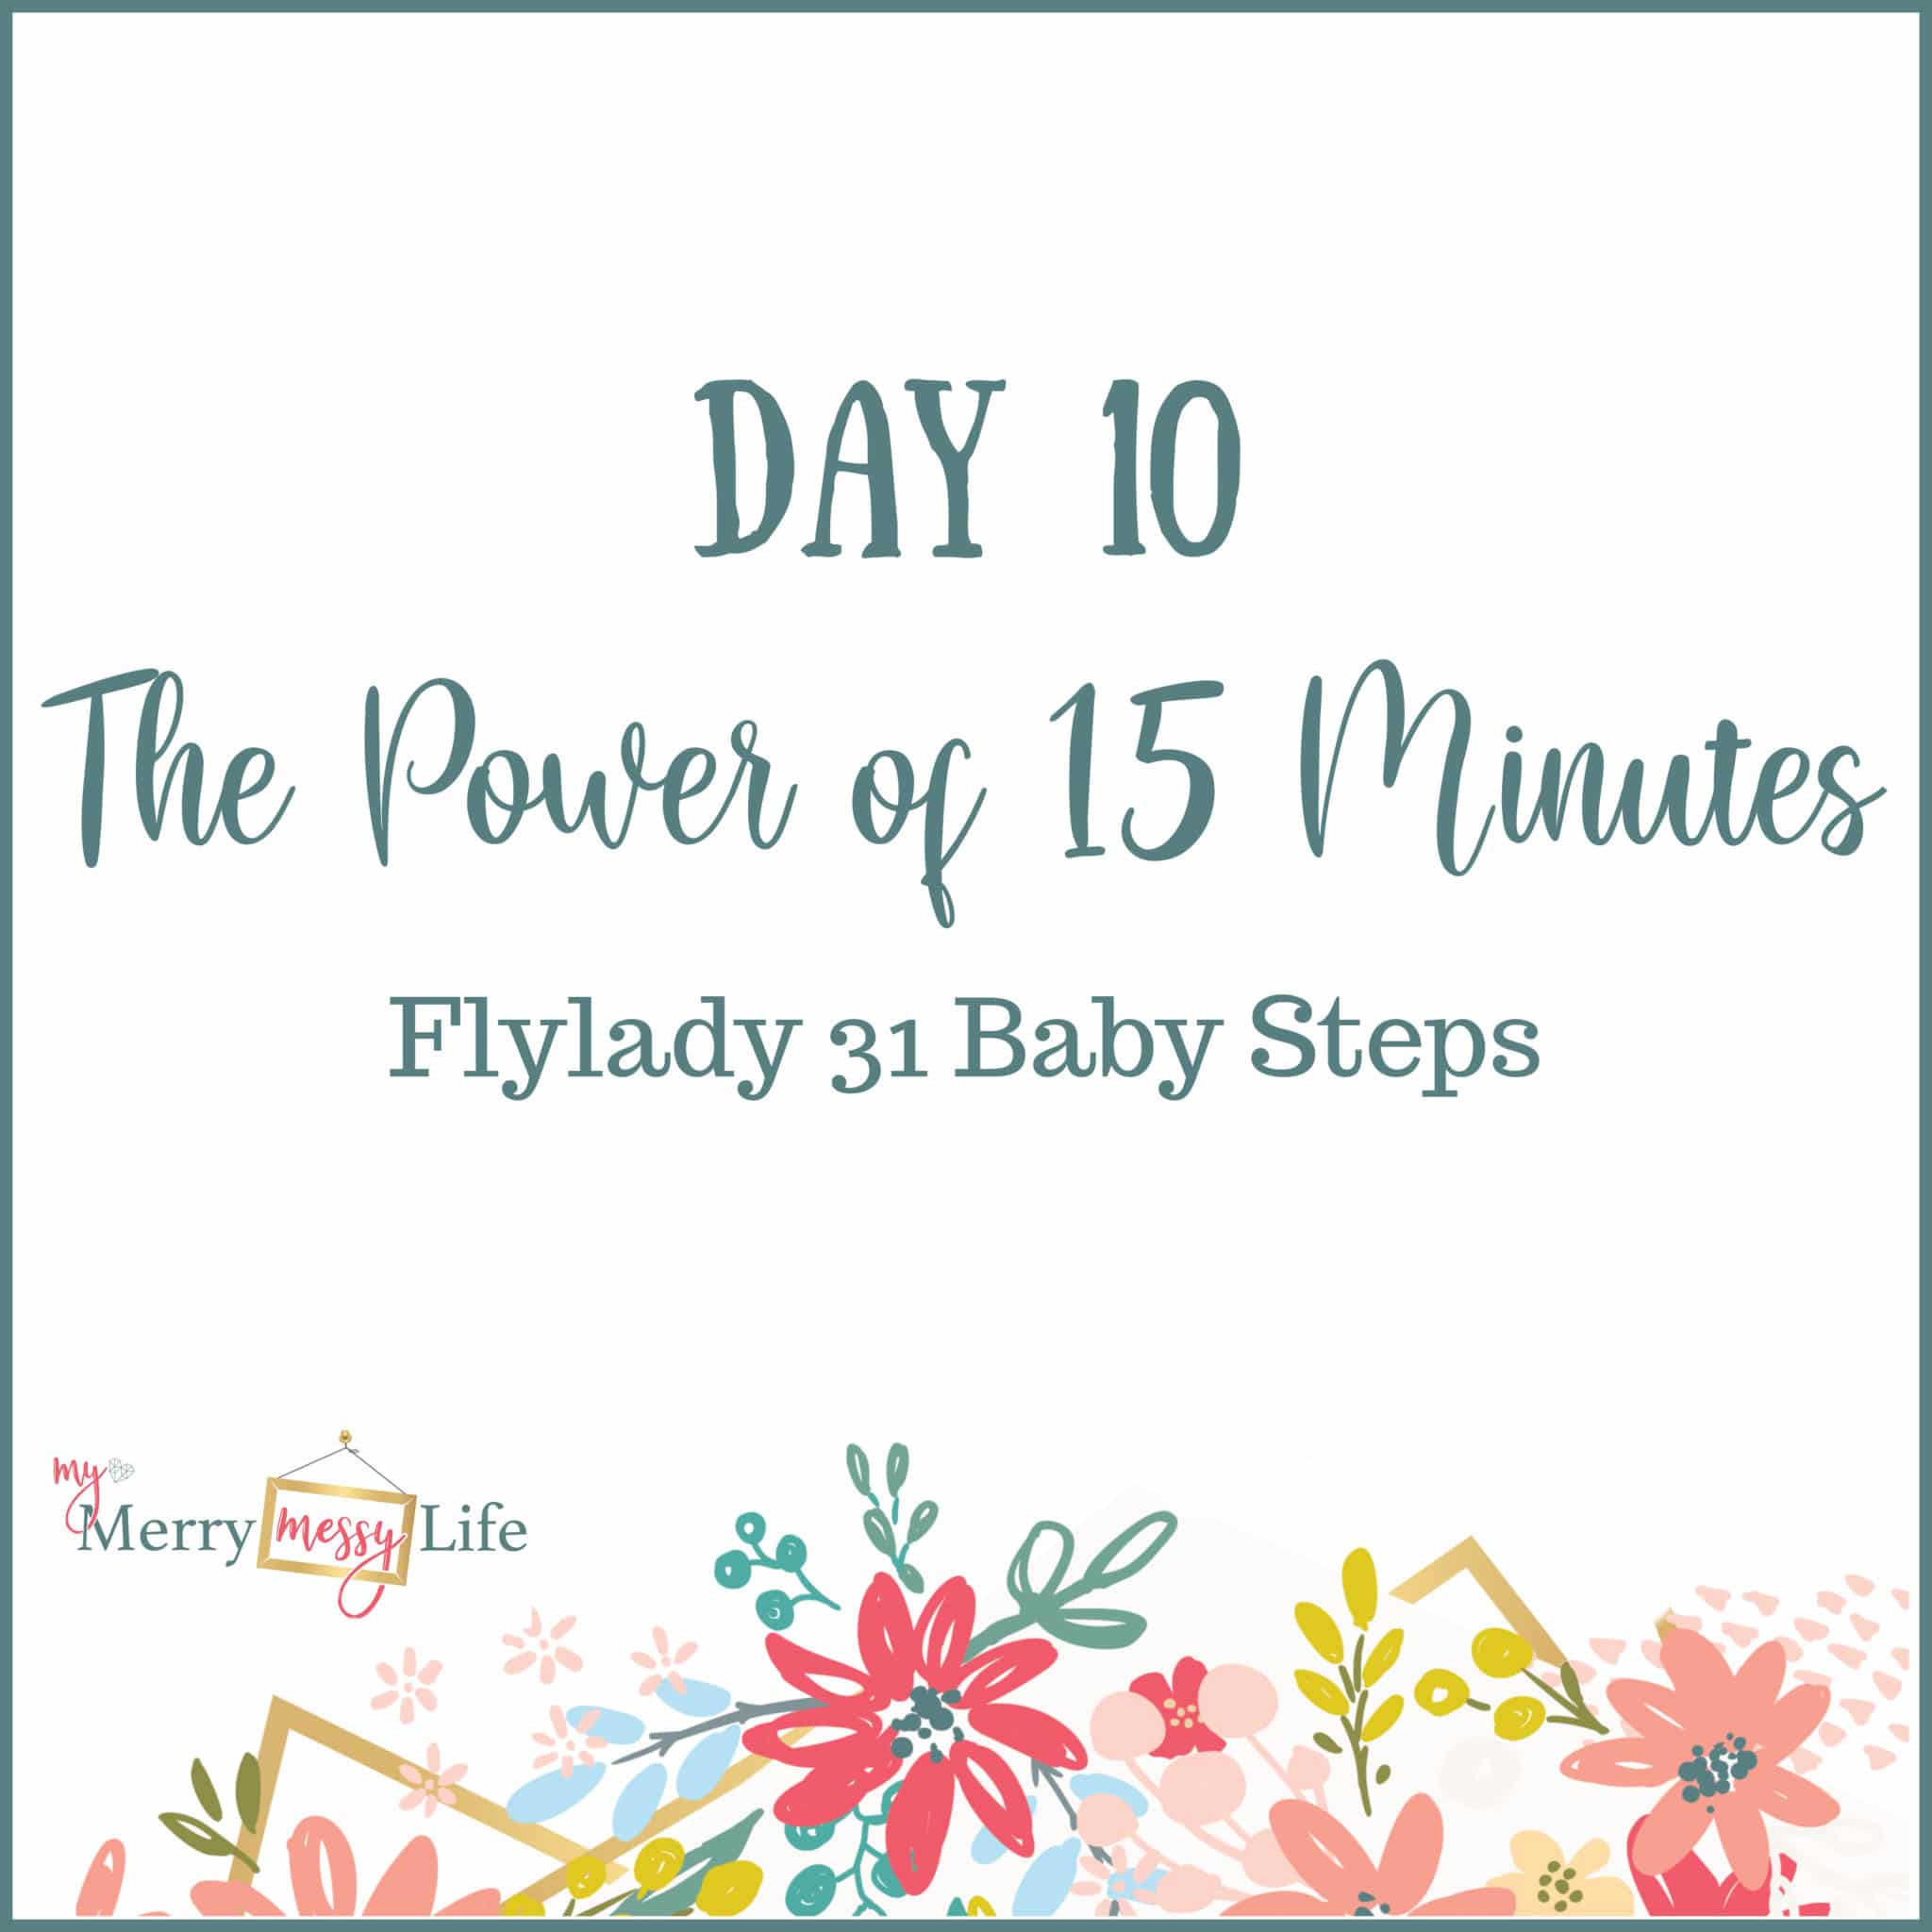 Flylady baby steps  - the power of 15 minutes